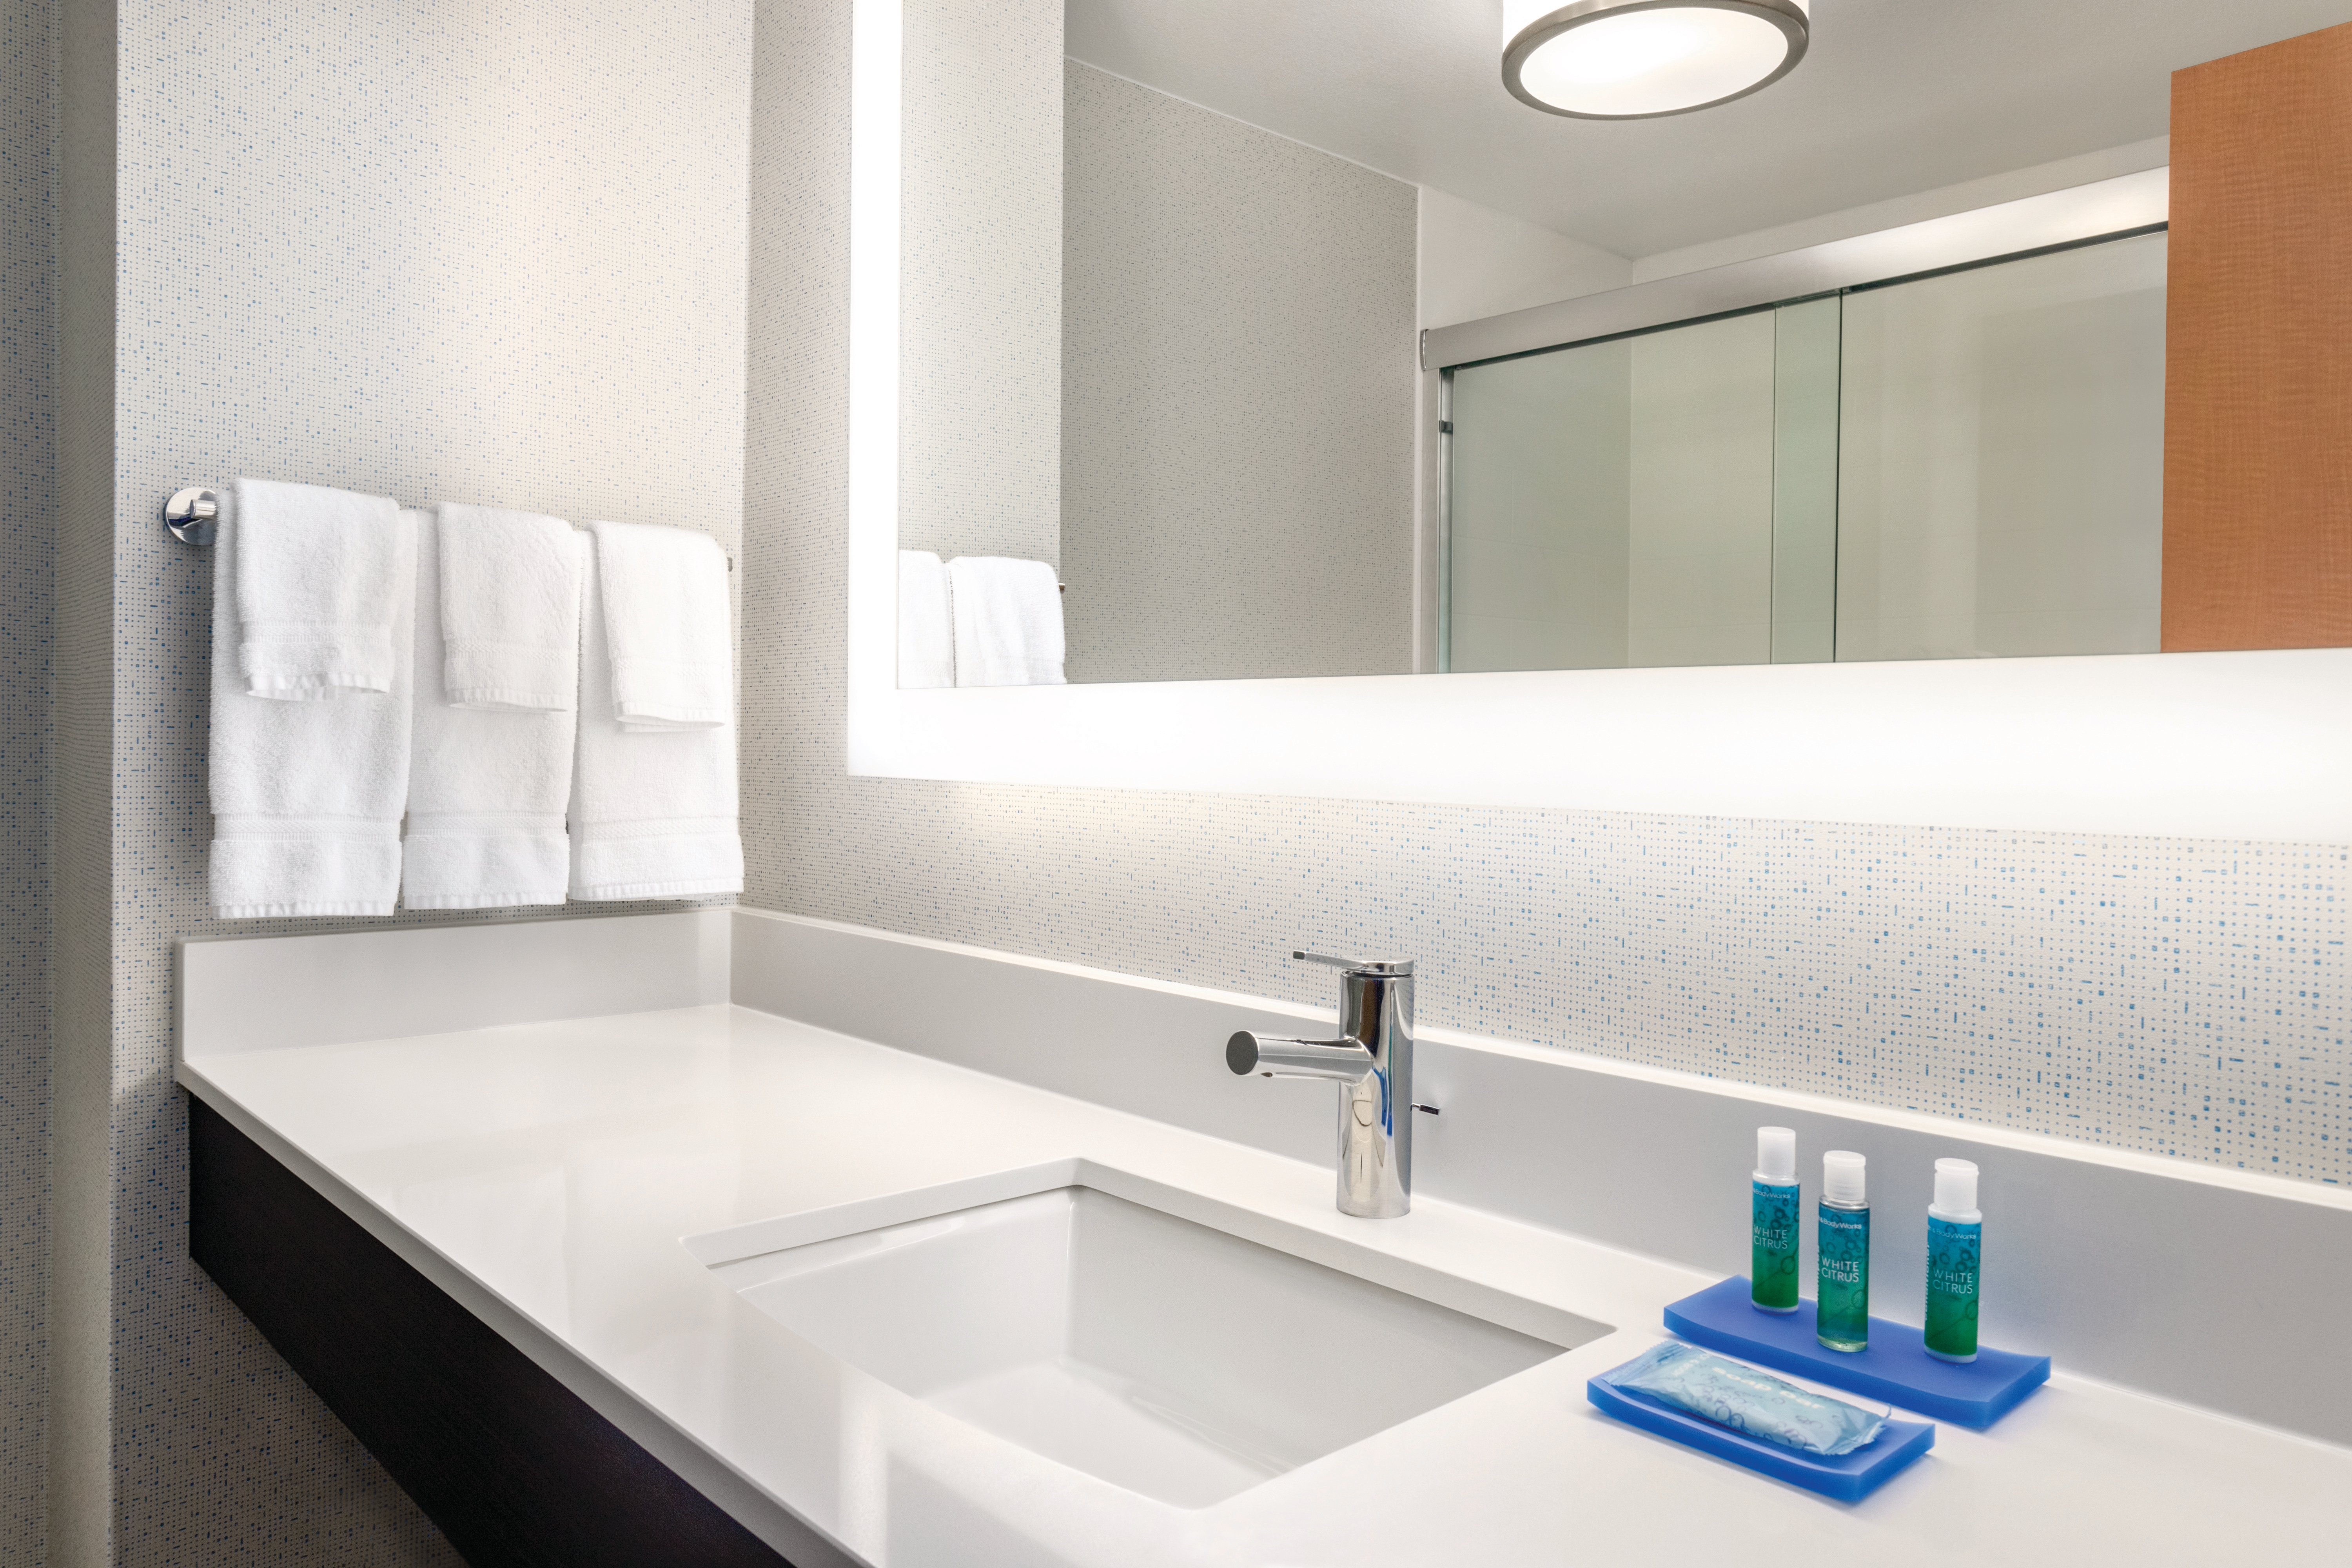 Our guest bathrooms have plenty of counter space to get ready